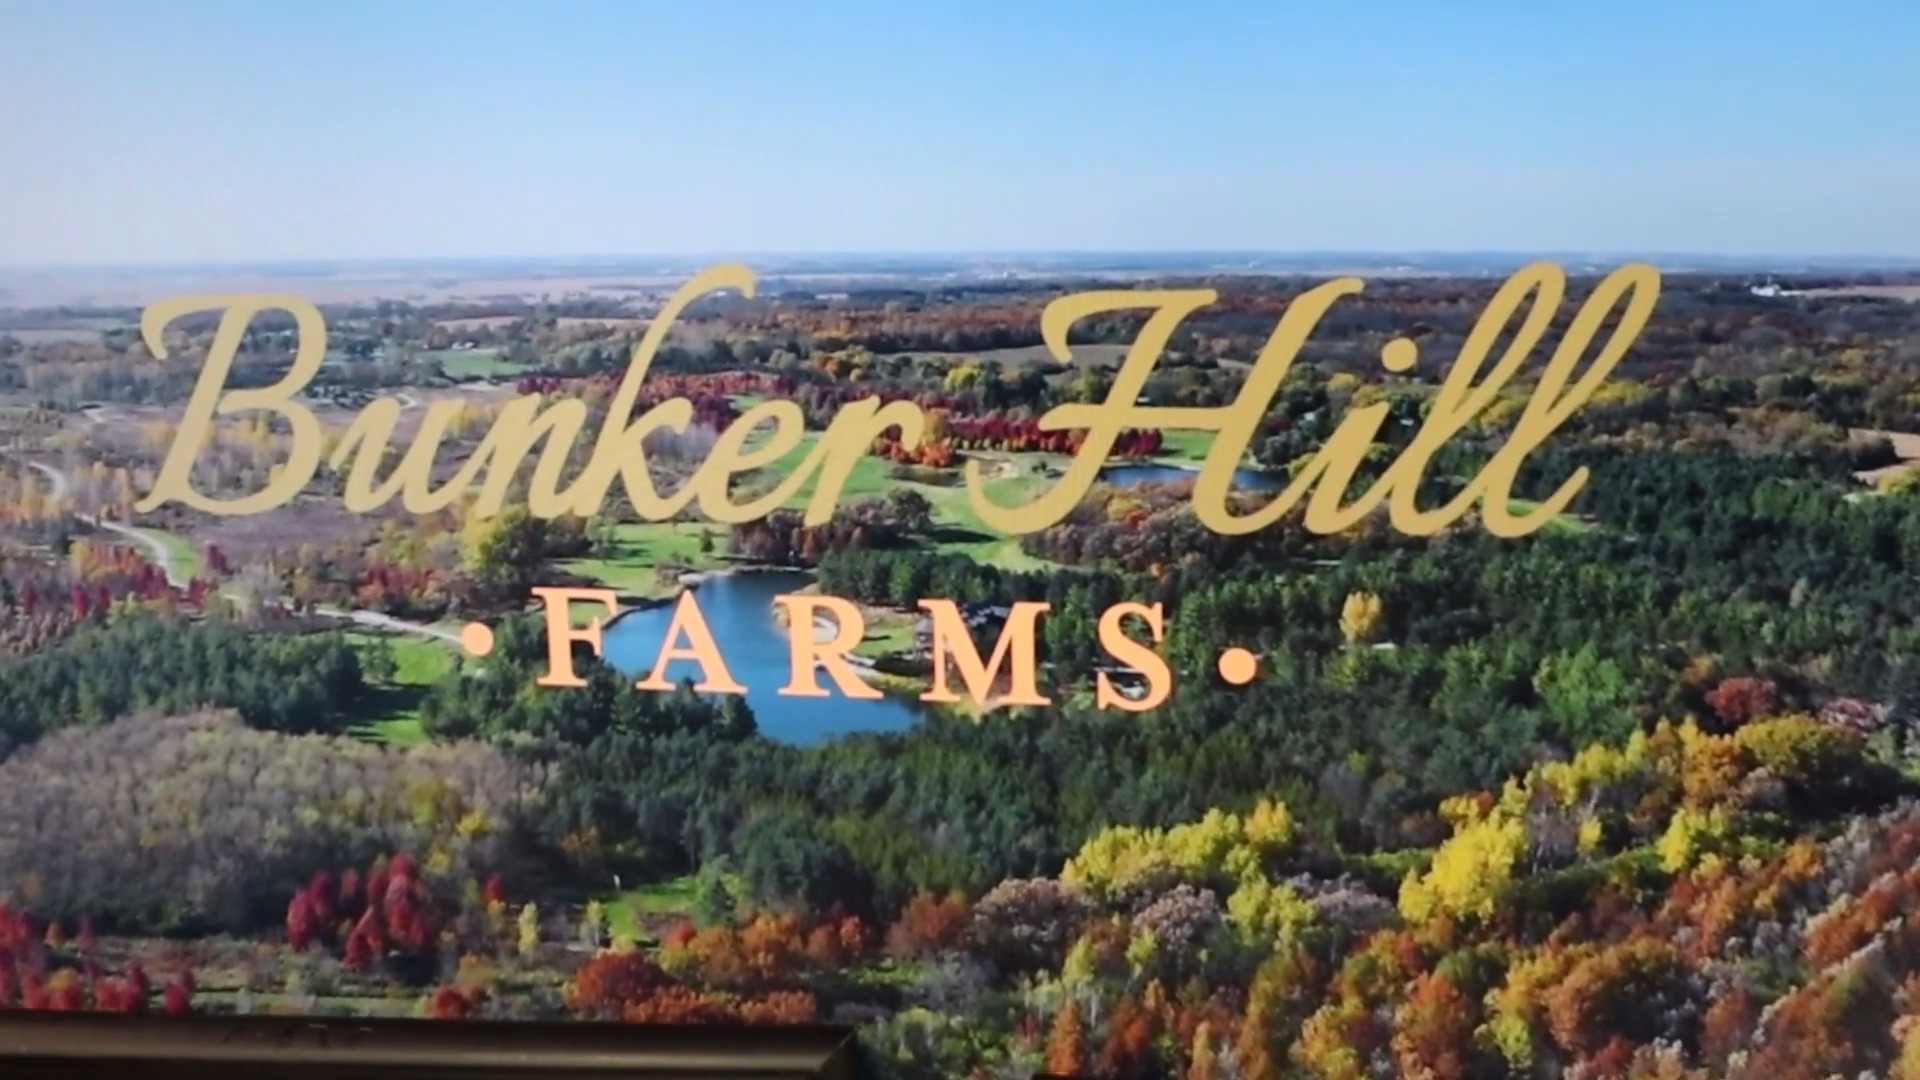 Exploring the Ultimate Golf Experience at Bunker Hill Farms